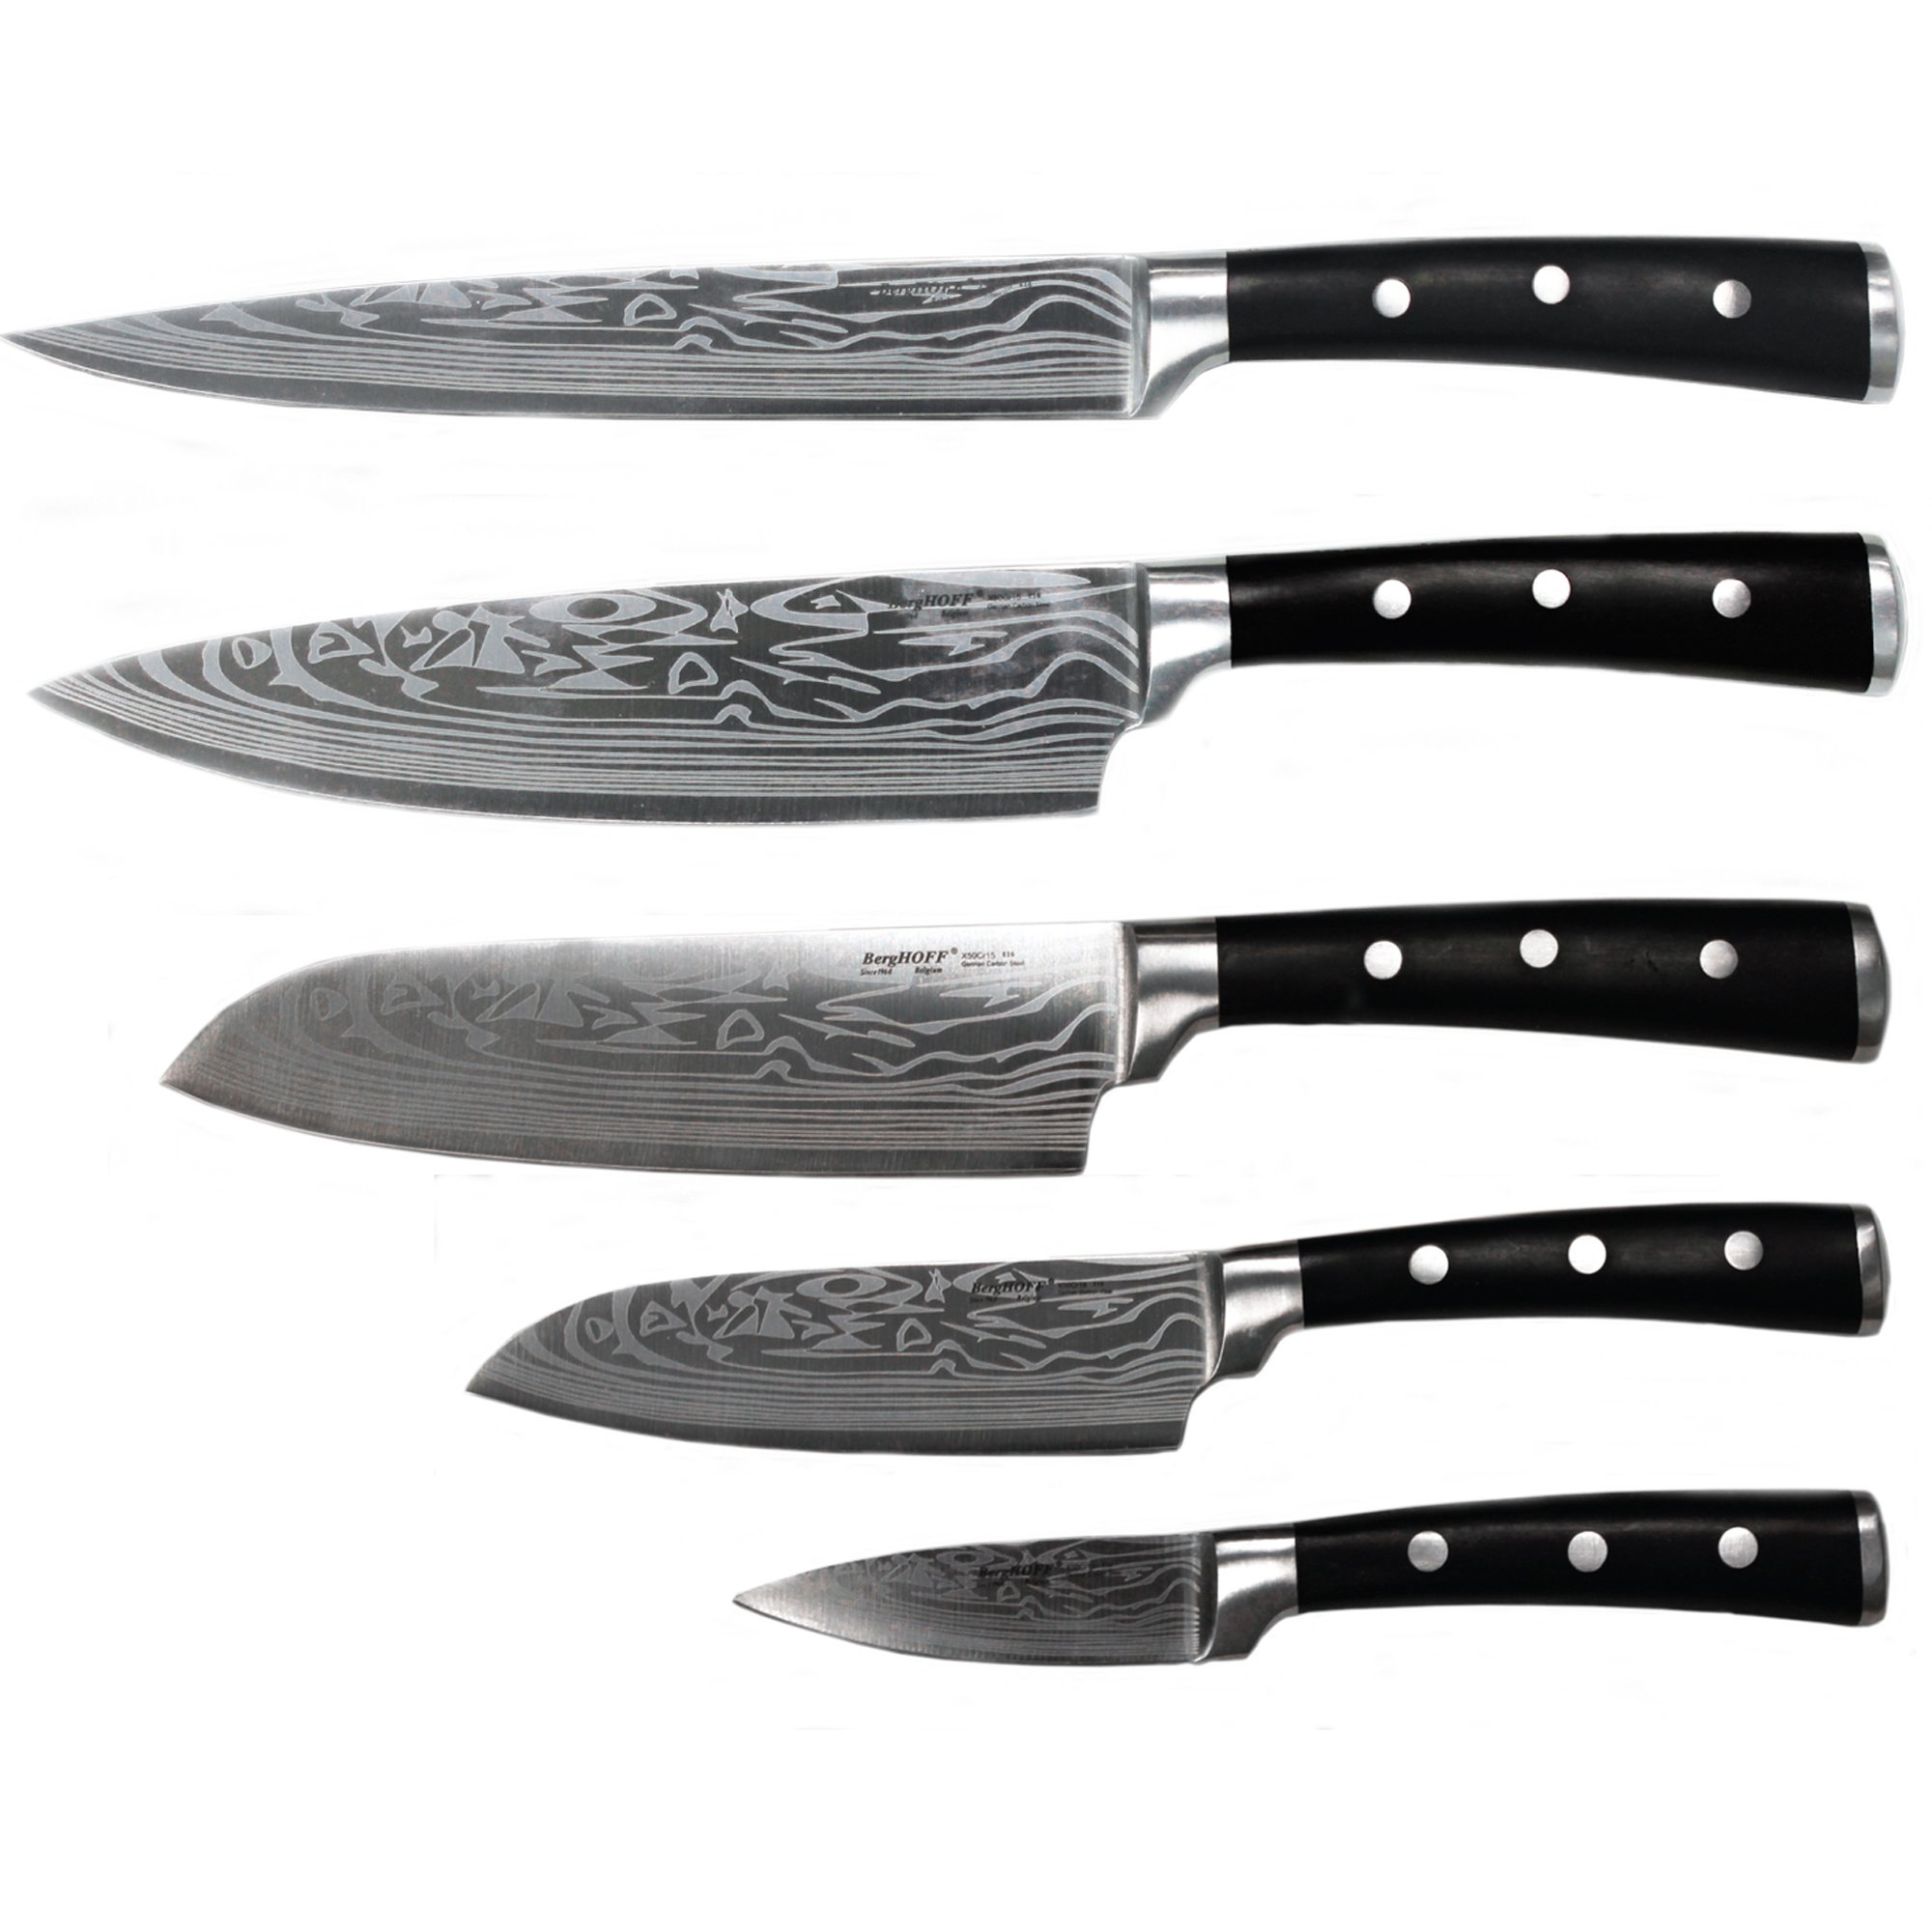 Berghoff Antigua 5Pc Knives With Case German Steel Etched Blade Ergonomically Designed Triple-riveted Handle Sharp & Well Balanced Satin Finish